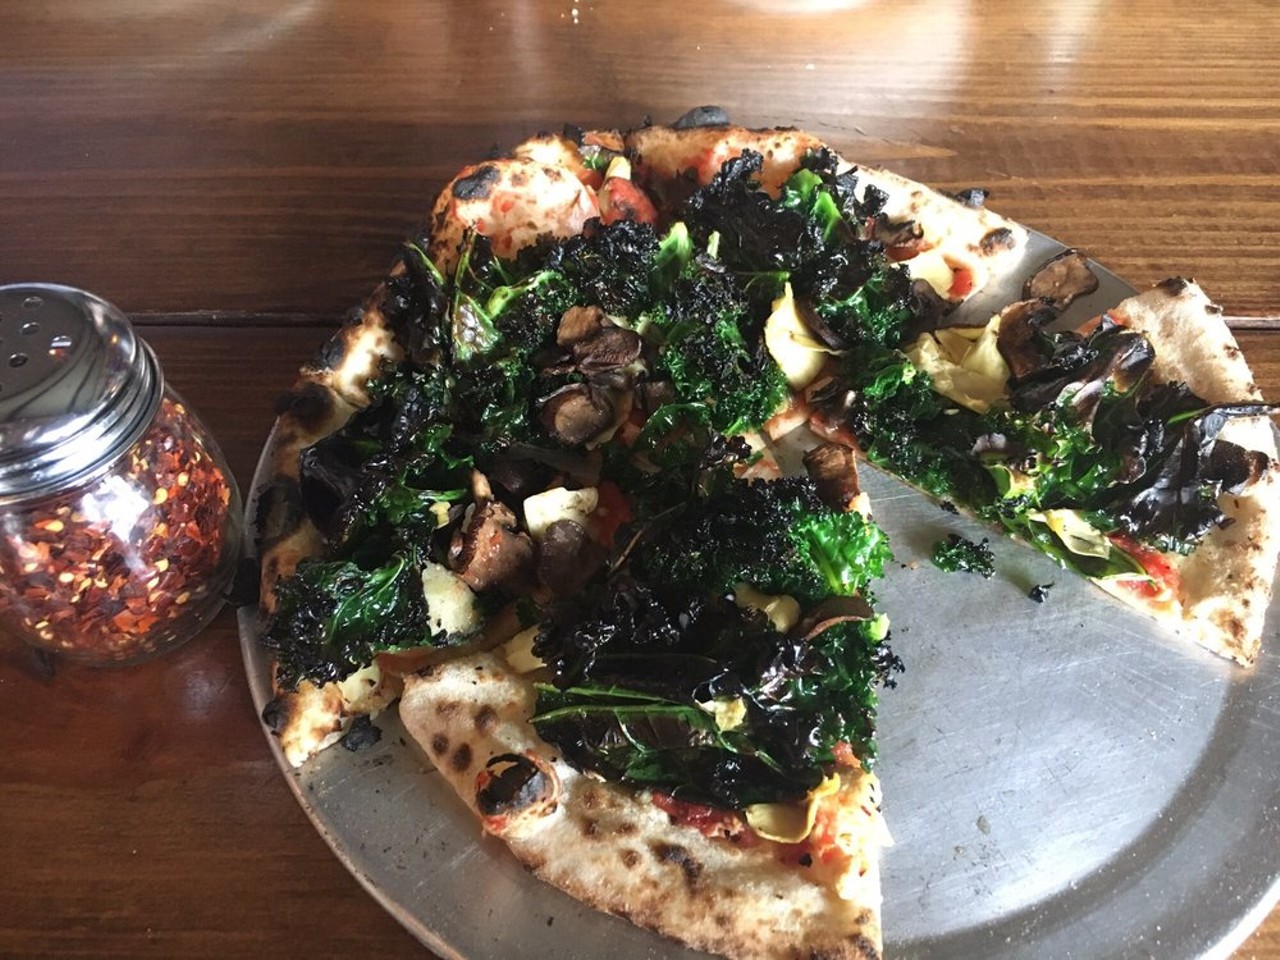 Pizza Bruno
3990 Curry Ford Road
Did you know Bruno's pizza dough is vegan? There are two vegan pies on the menu, the classic marinara with basil and sliced garli, and the Viva Verde, topped with a whole lotta veg. 
Photo via Yelp user Lisha Y.